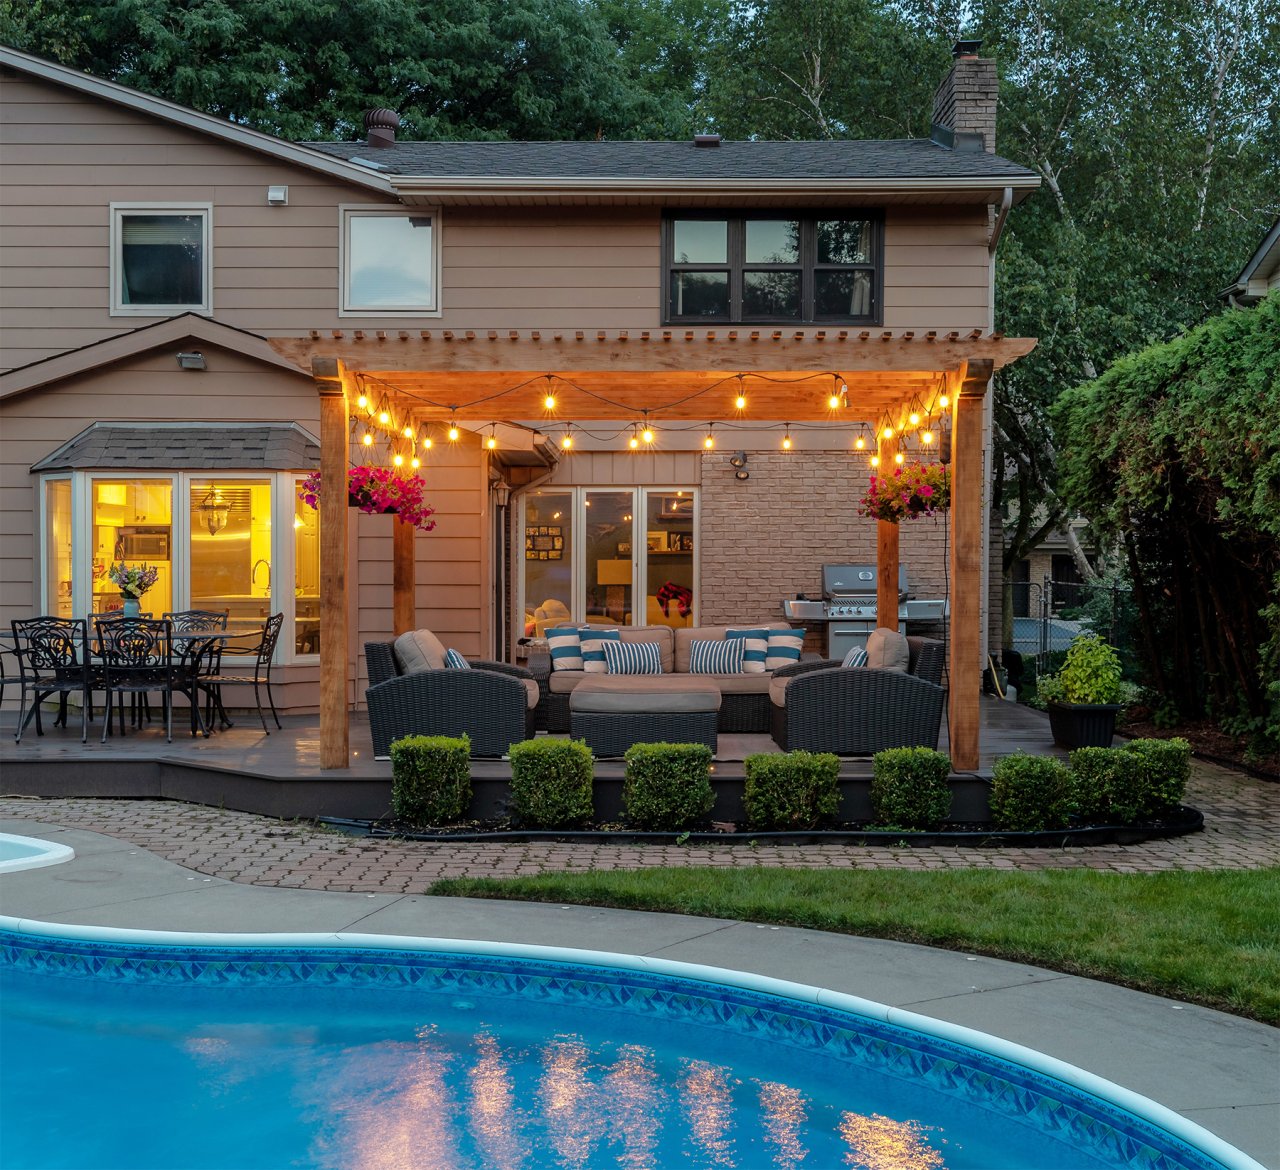 Residential backyard with patio and pergola with twinkling lights and hanging flower baskets